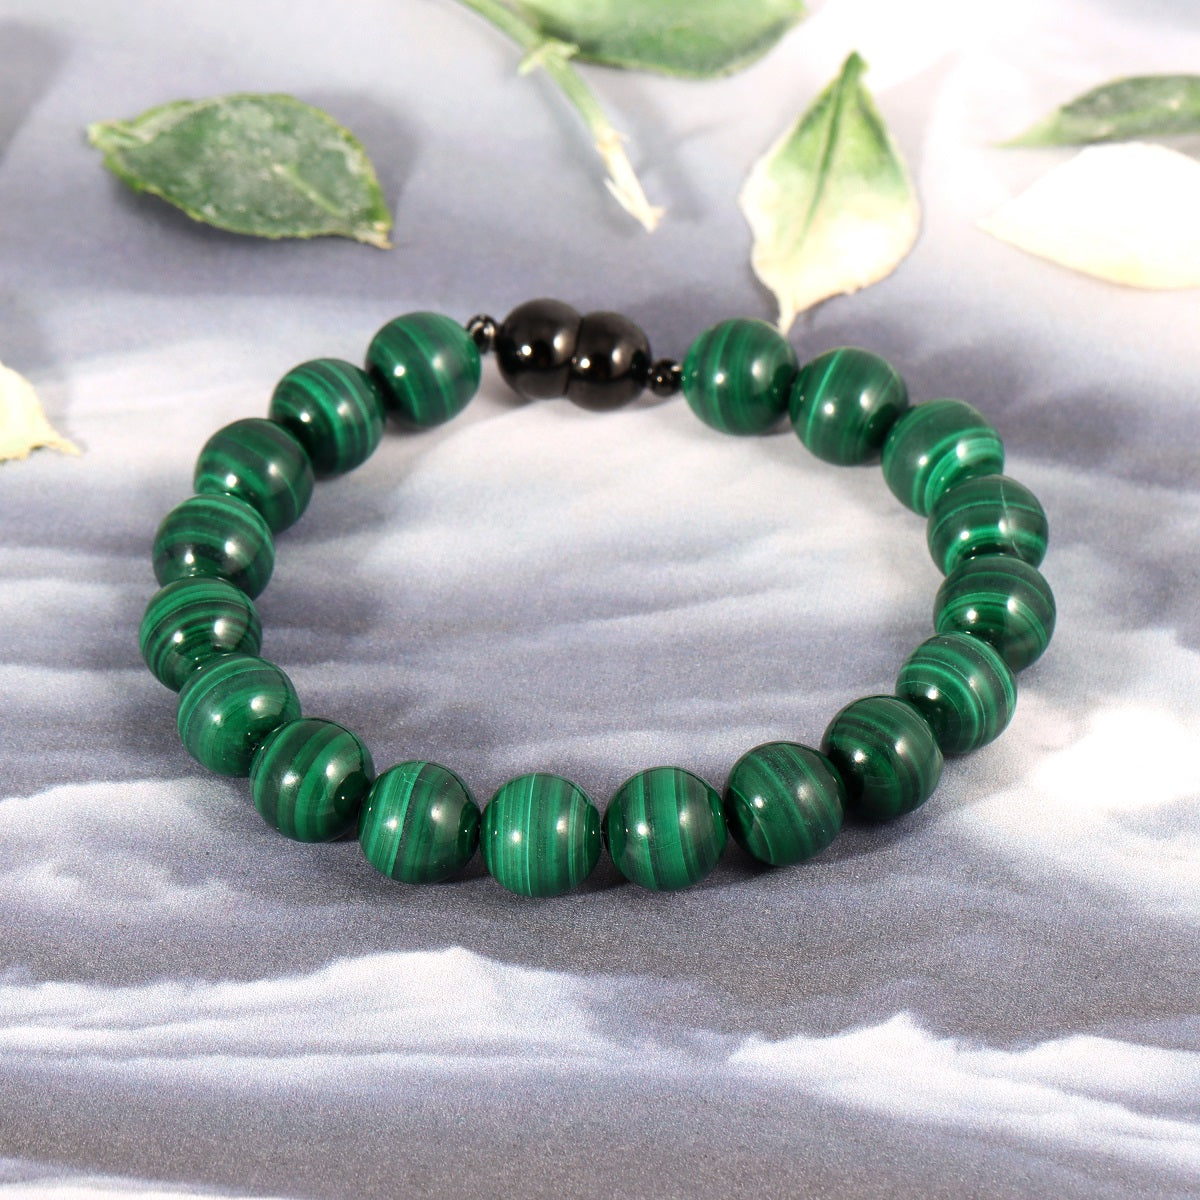 An image featuring the malachite gemstones alongside keywords like transformation, protection, and balance, symbolizing their metaphysical properties.